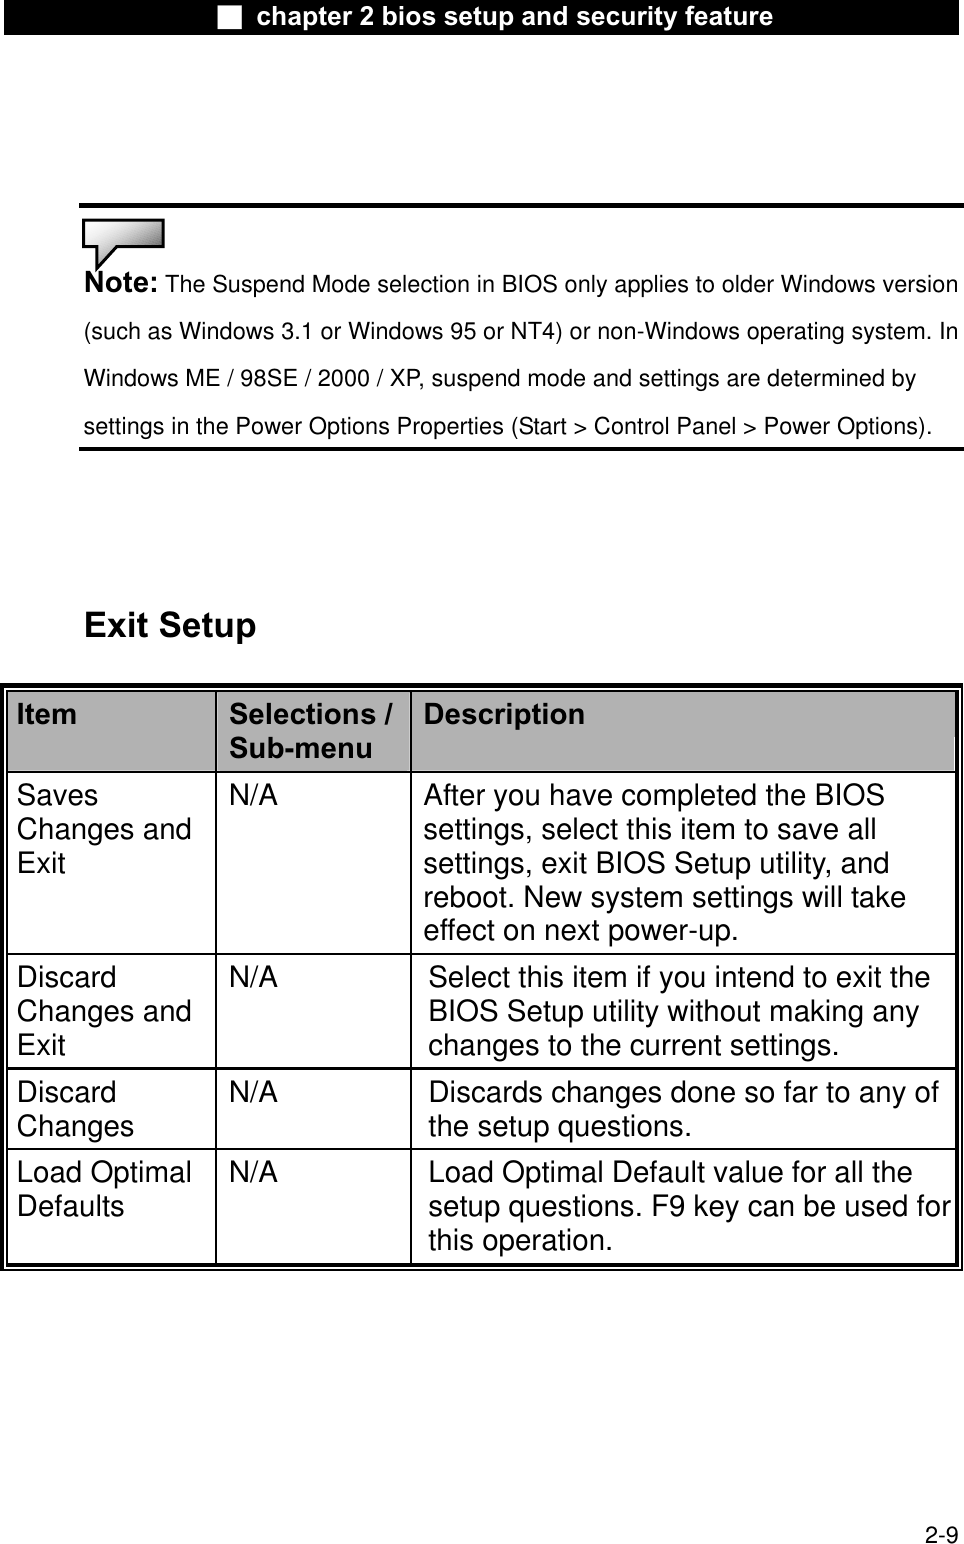 Ϯ chapter 2 bios setup and security featureNote: The Suspend Mode selection in BIOS only applies to older Windows version(such as Windows 3.1 or Windows 95 or NT4) or non-Windows operating system. InWindows ME / 98SE / 2000 / XP, suspend mode and settings are determined bysettings in the Power Options Properties (Start &gt; Control Panel &gt; Power Options).Exit Setup Item Selections /Sub-menuDescriptionSavesChanges andExitN/A After you have completed the BIOS settings, select this item to save all settings, exit BIOS Setup utility, and reboot. New system settings will takeeffect on next power-up.!DiscardChanges andExitN/A Select this item if you intend to exit the BIOS Setup utility without making any changes to the current settings.DiscardChanges N/A Discards changes done so far to any of the setup questions.Load OptimalDefaults N/A Load Optimal Default value for all the setup questions. F9 key can be used for this operation. 2-9